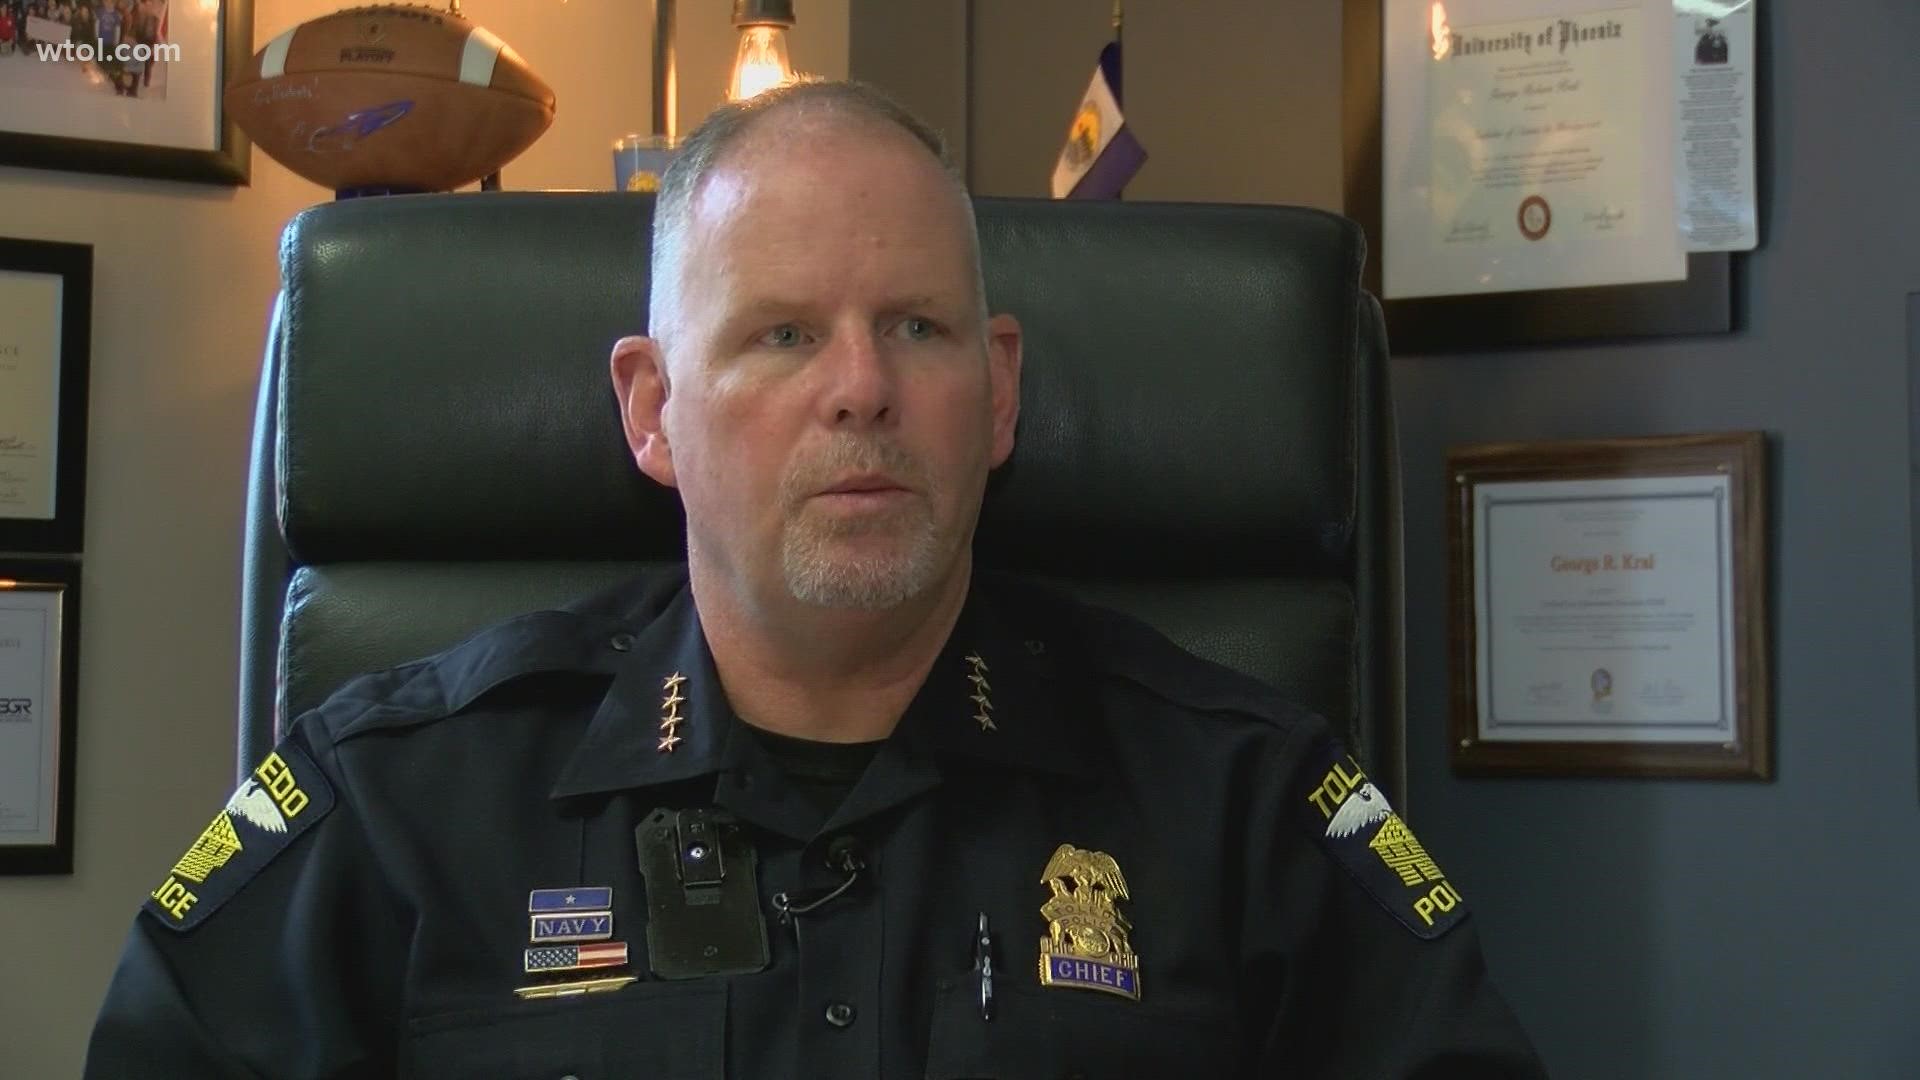 Toledo police chief George Kral says most of the recent violent crime is tied to "drugs and gangs" but other factors like the pandemic are also playing a role.